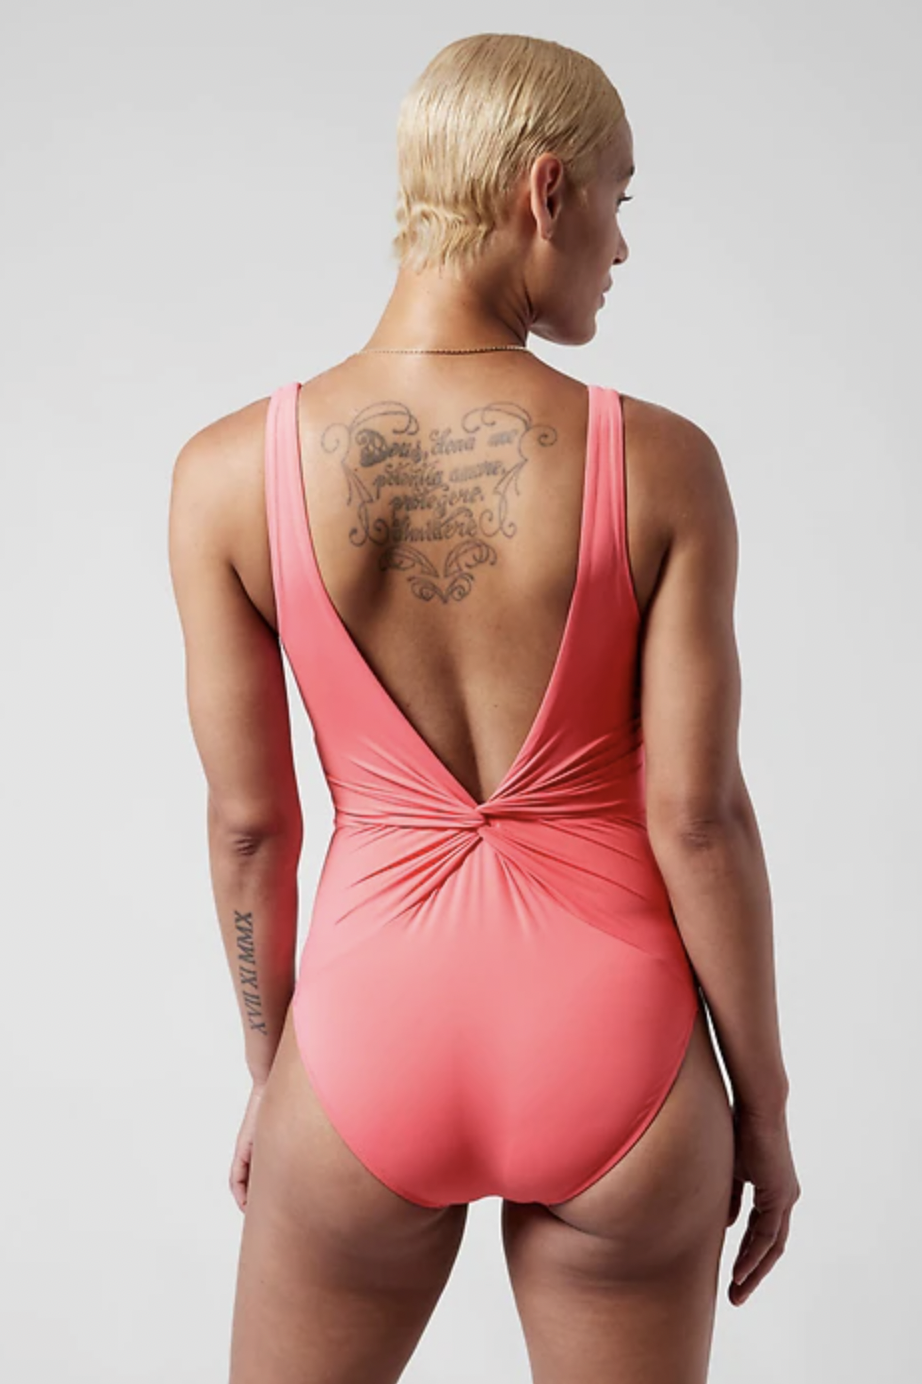 Hip Dips? These 21 Flattering Swimsuits Ditch the High-Cut Leg